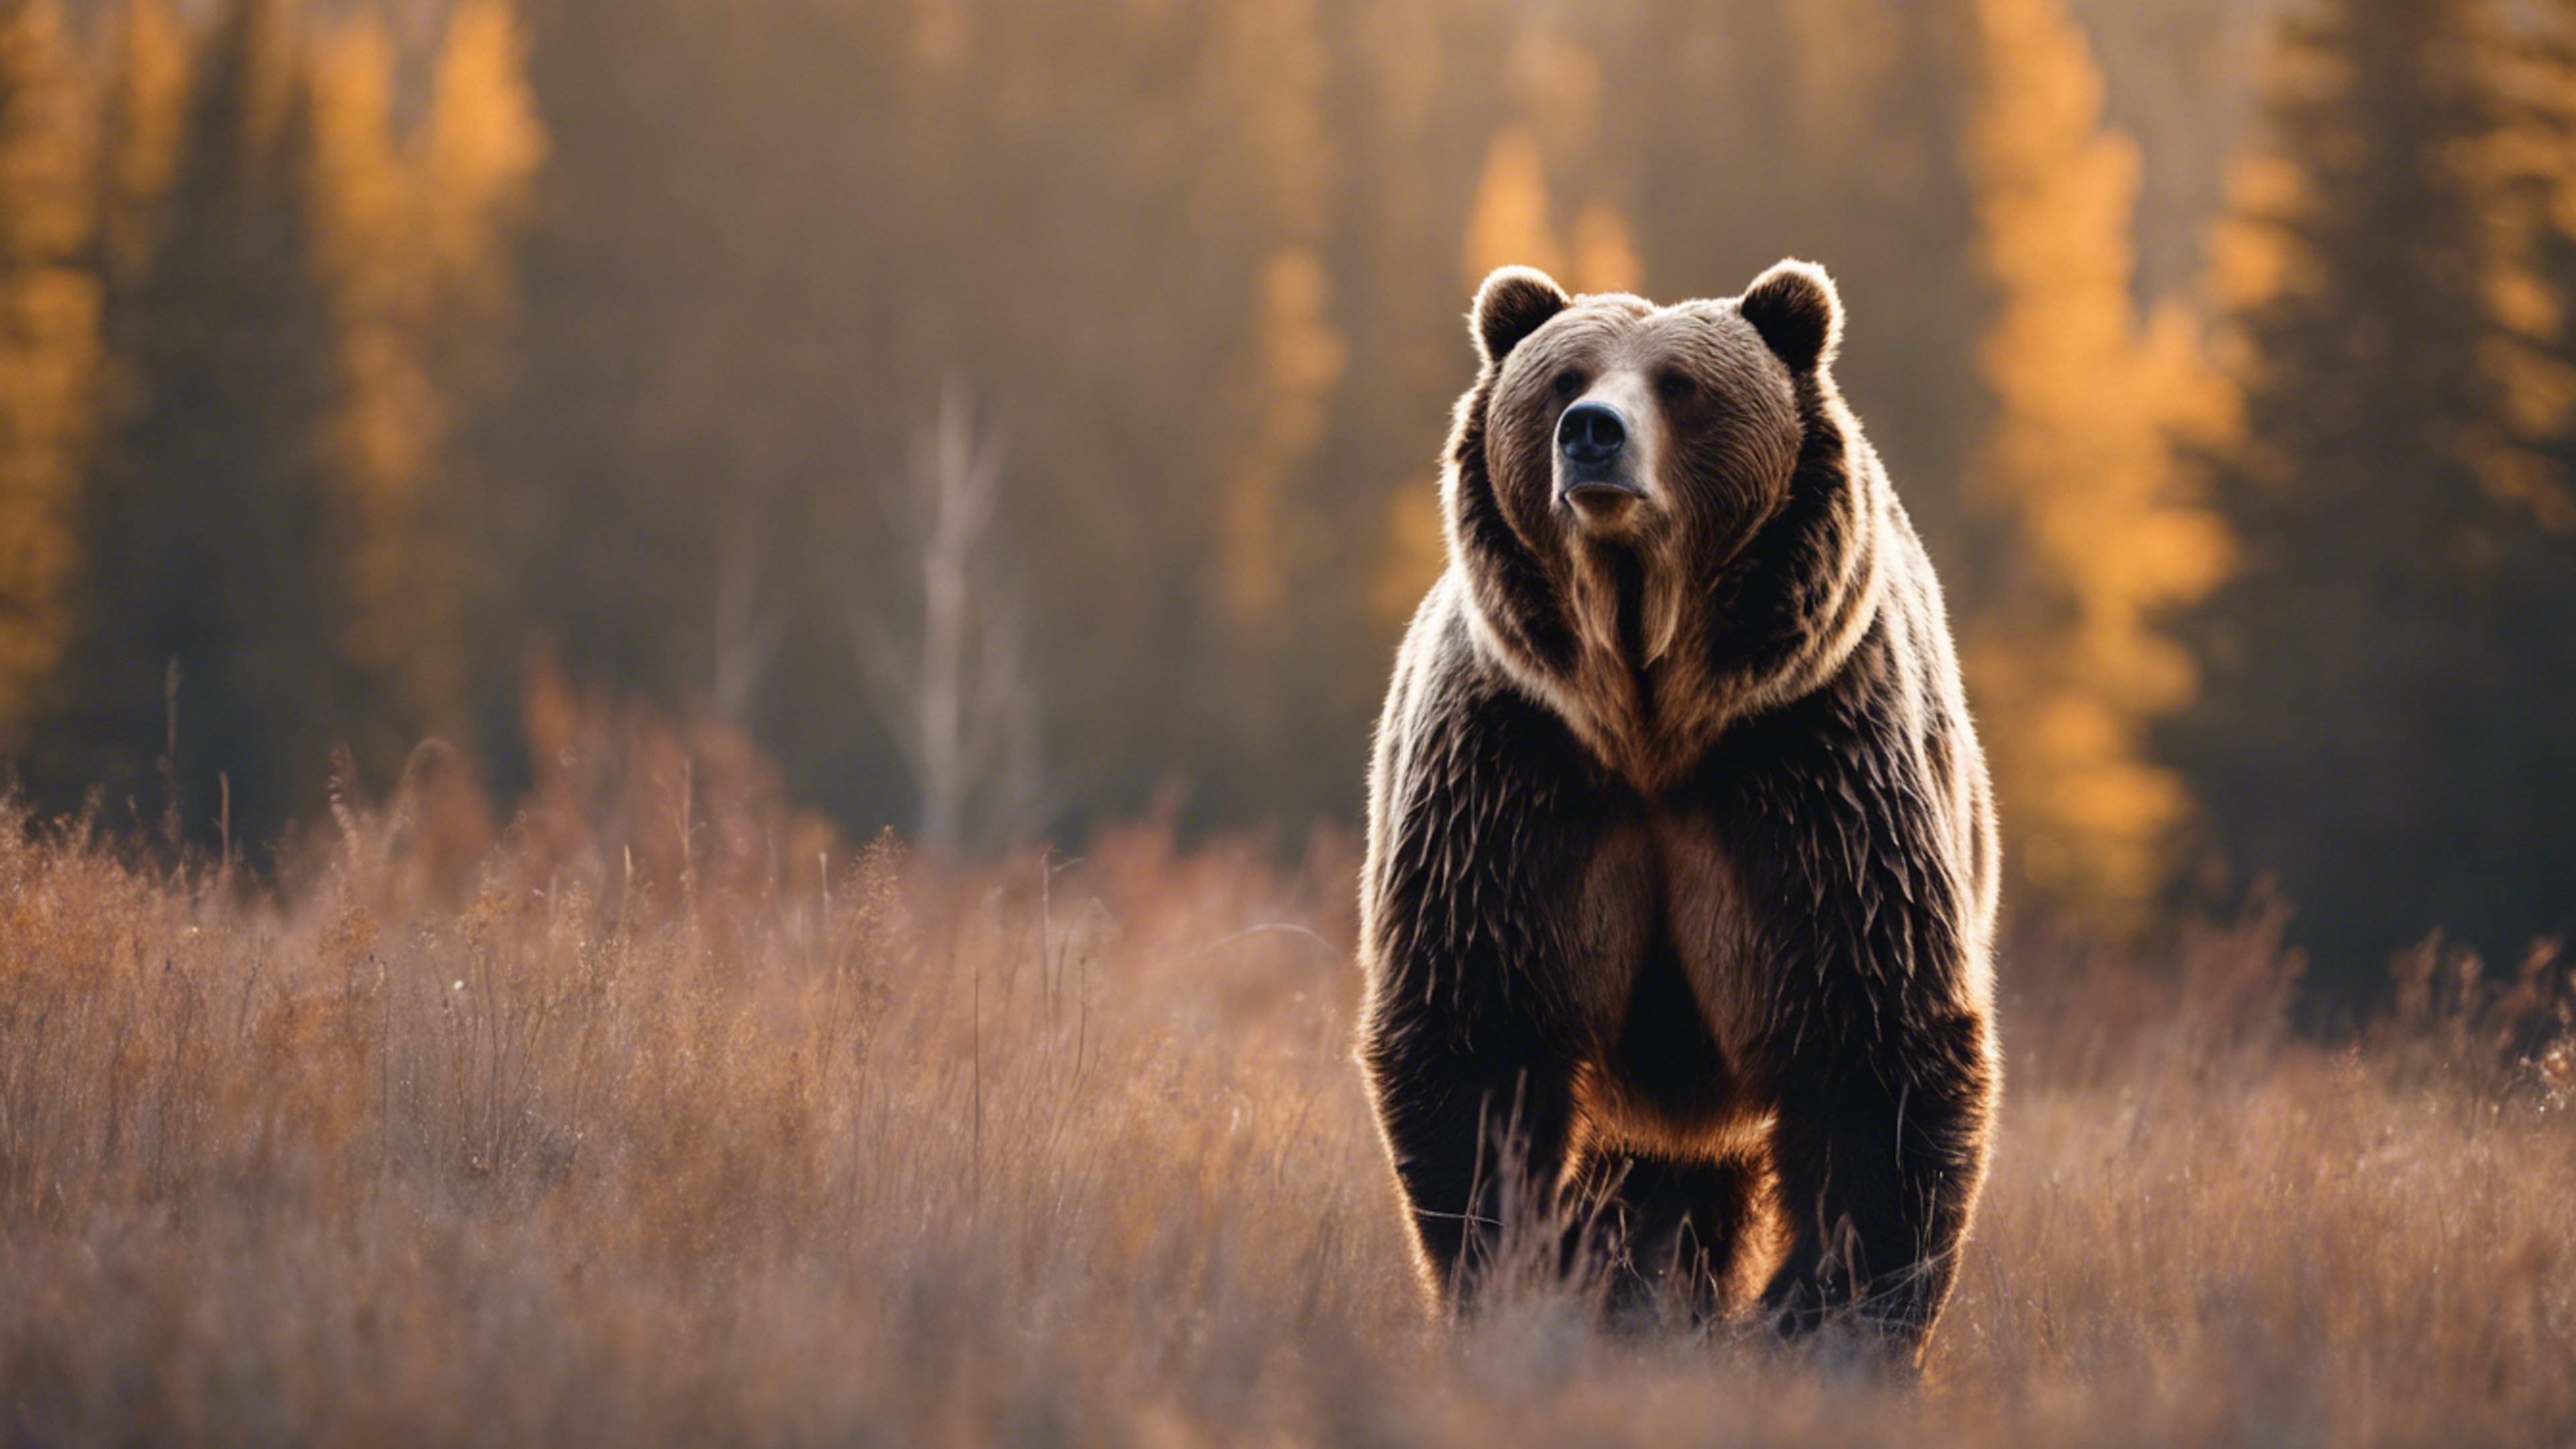 A majestic brown grizzly bear standing tall in the wild Wallpaper[4fb1e3b24f2c4984aff0]